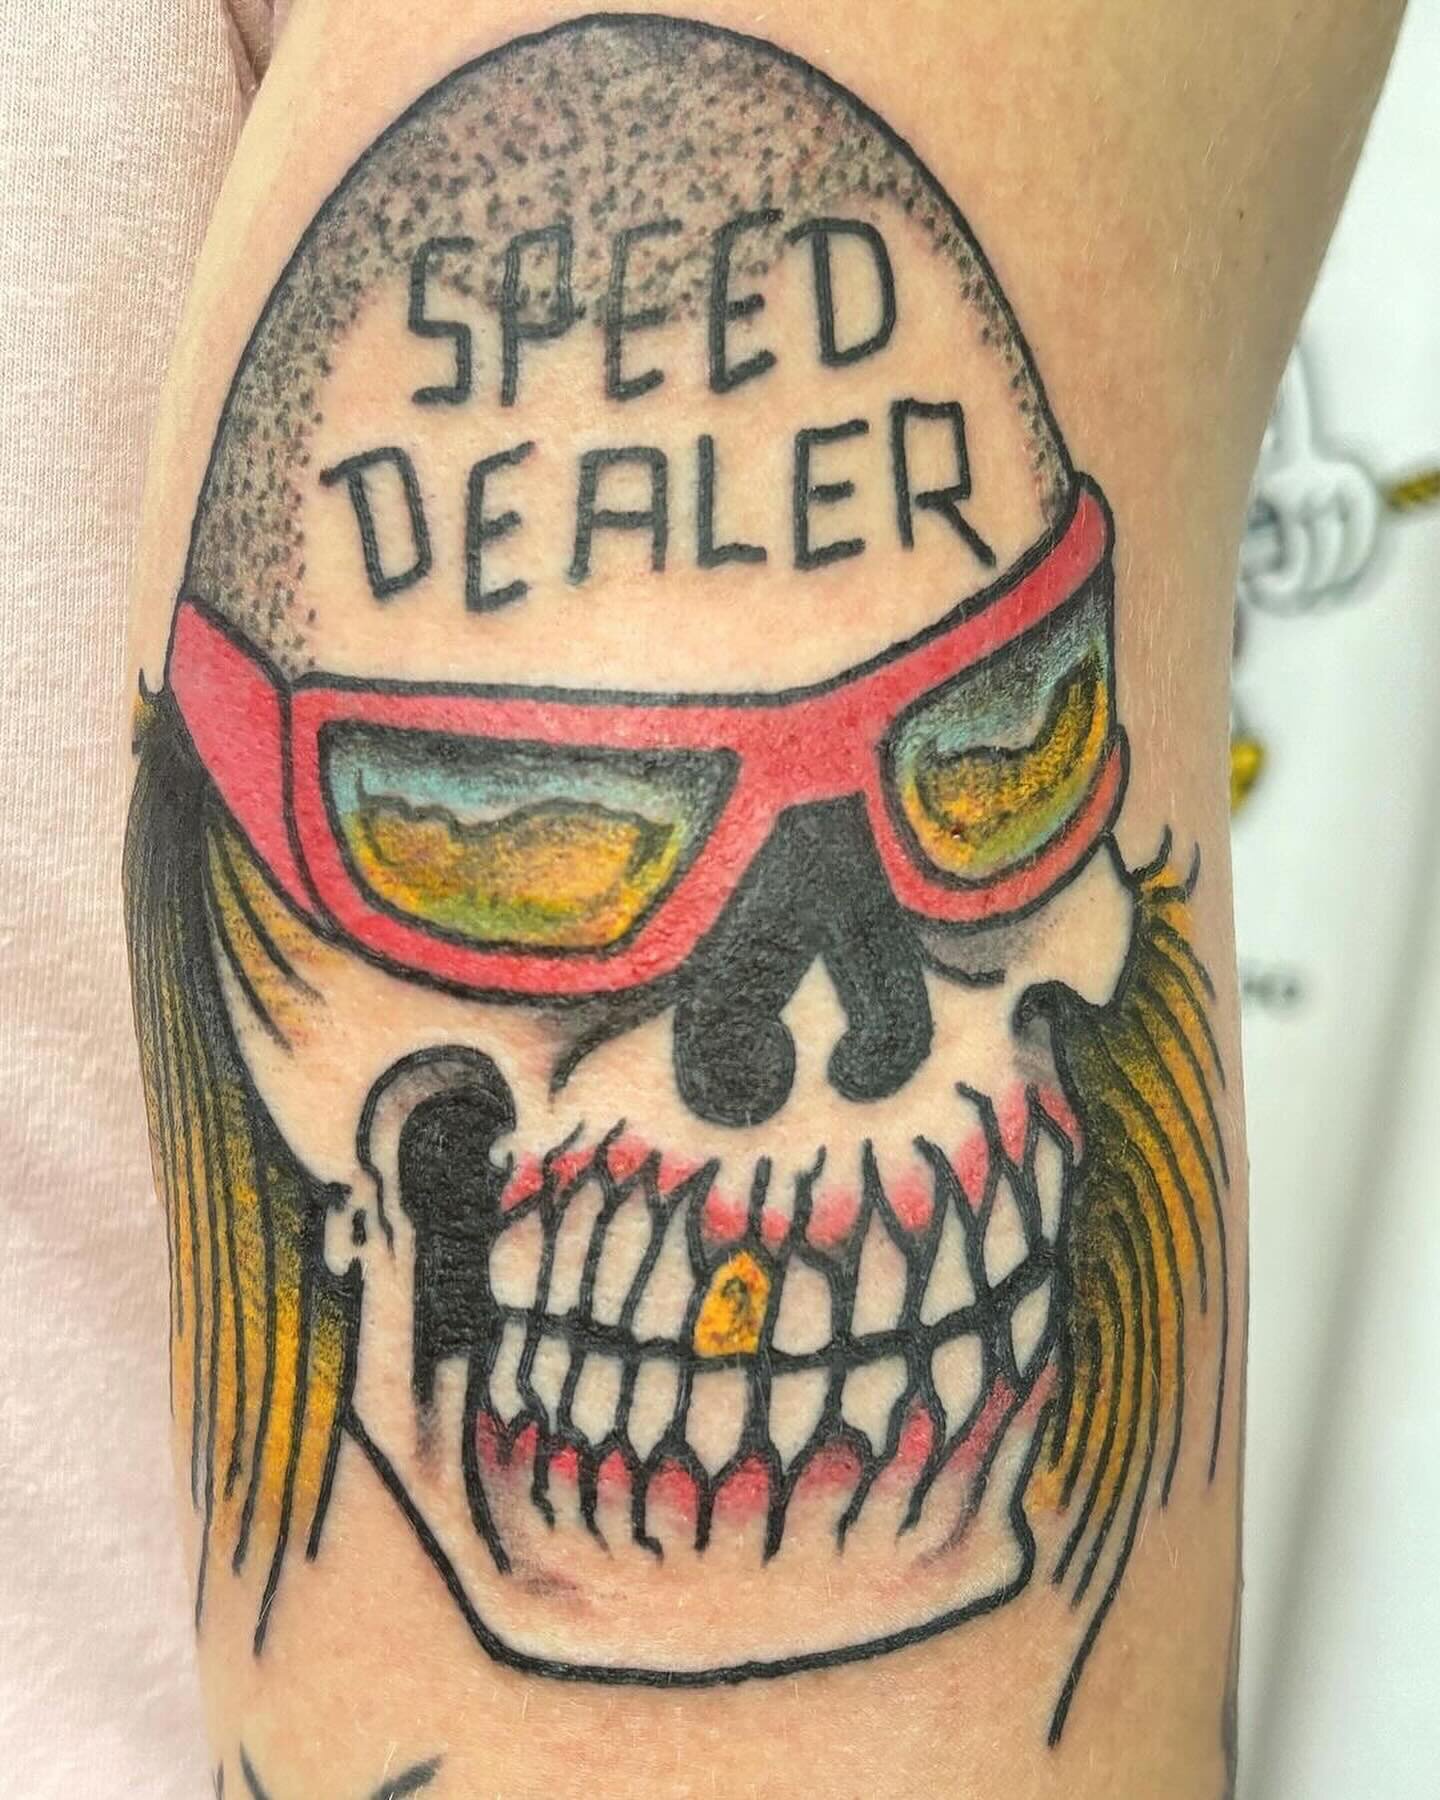 🎱 This guy hasn&rsquo;t slept for years. A play on the classic &ldquo;speed skull&rdquo; flash.  Made by @brett_eberhard_tattoo @thirteenfeettattoo NEWTOWN. FOR BOOKINGS with @brett_eberhard_tattoo hit the link in our bio, DM us or walk right on in 